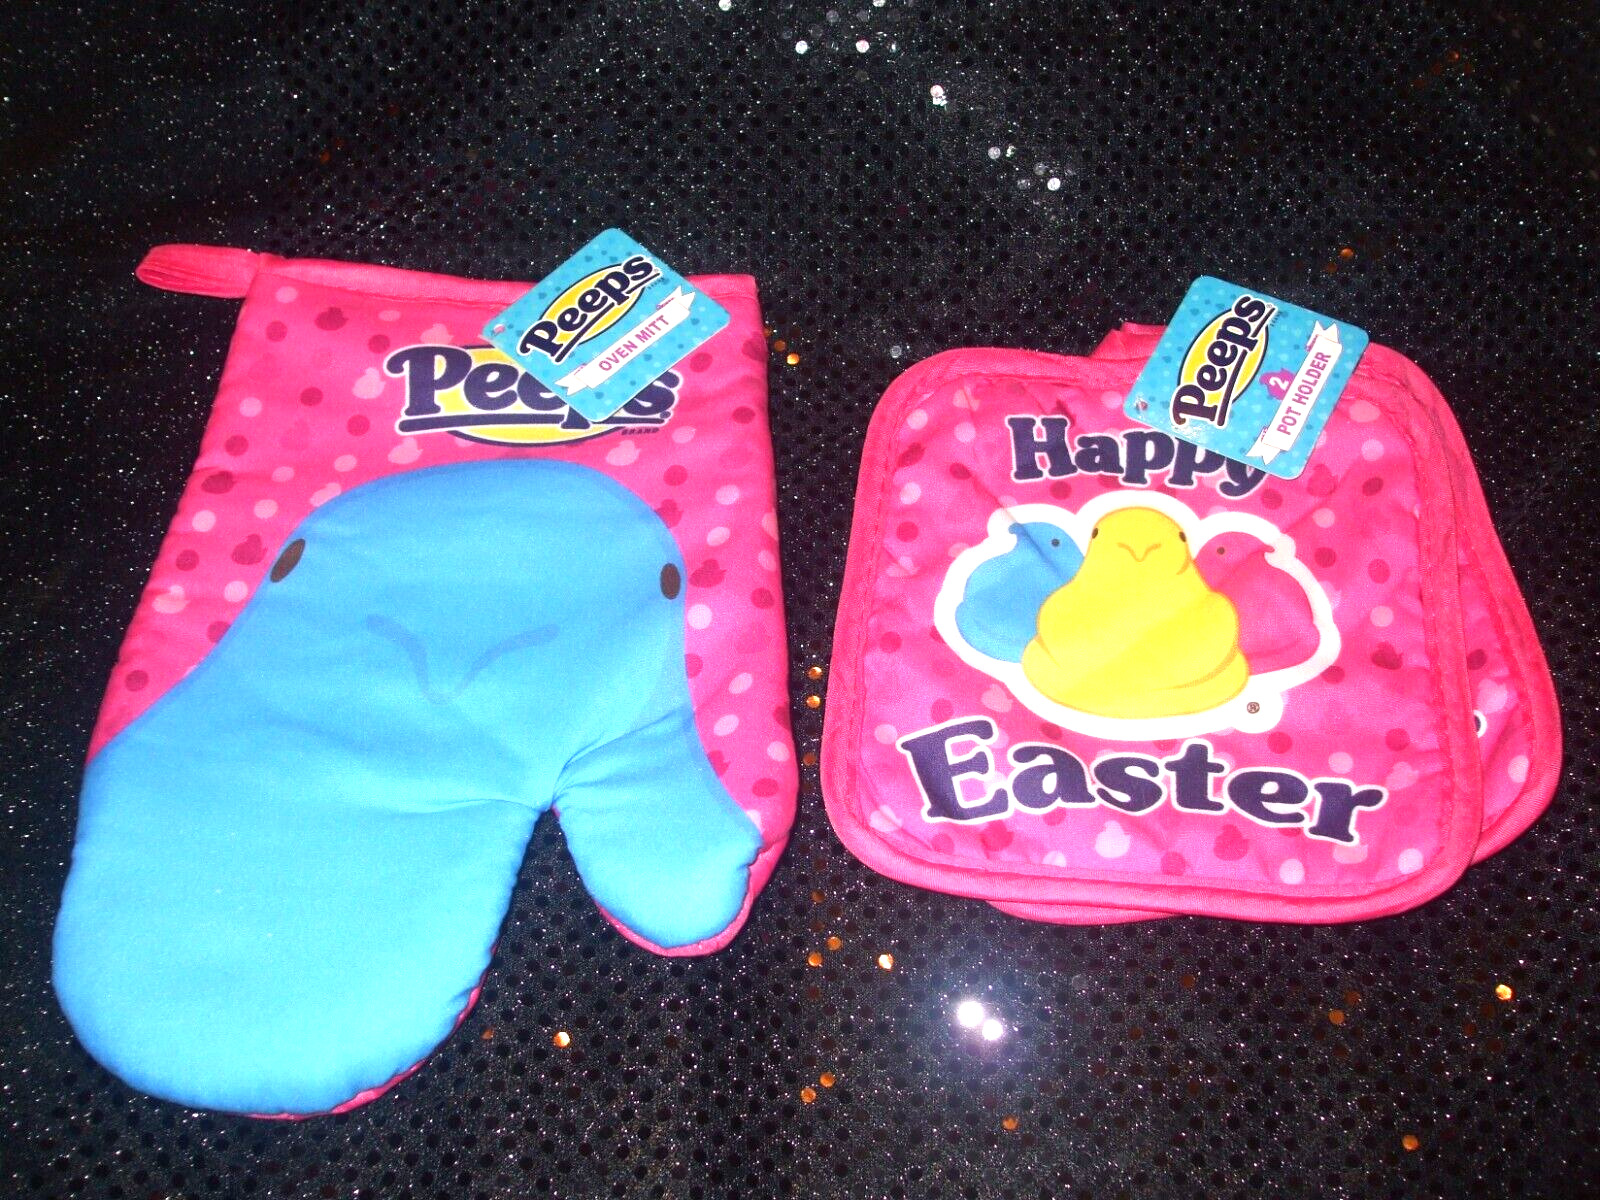 PEEPS EASTER SET OF 2 (PINK) POTHOLDERS & 1 (PINK) OVENMIT NEW W/ TAGS